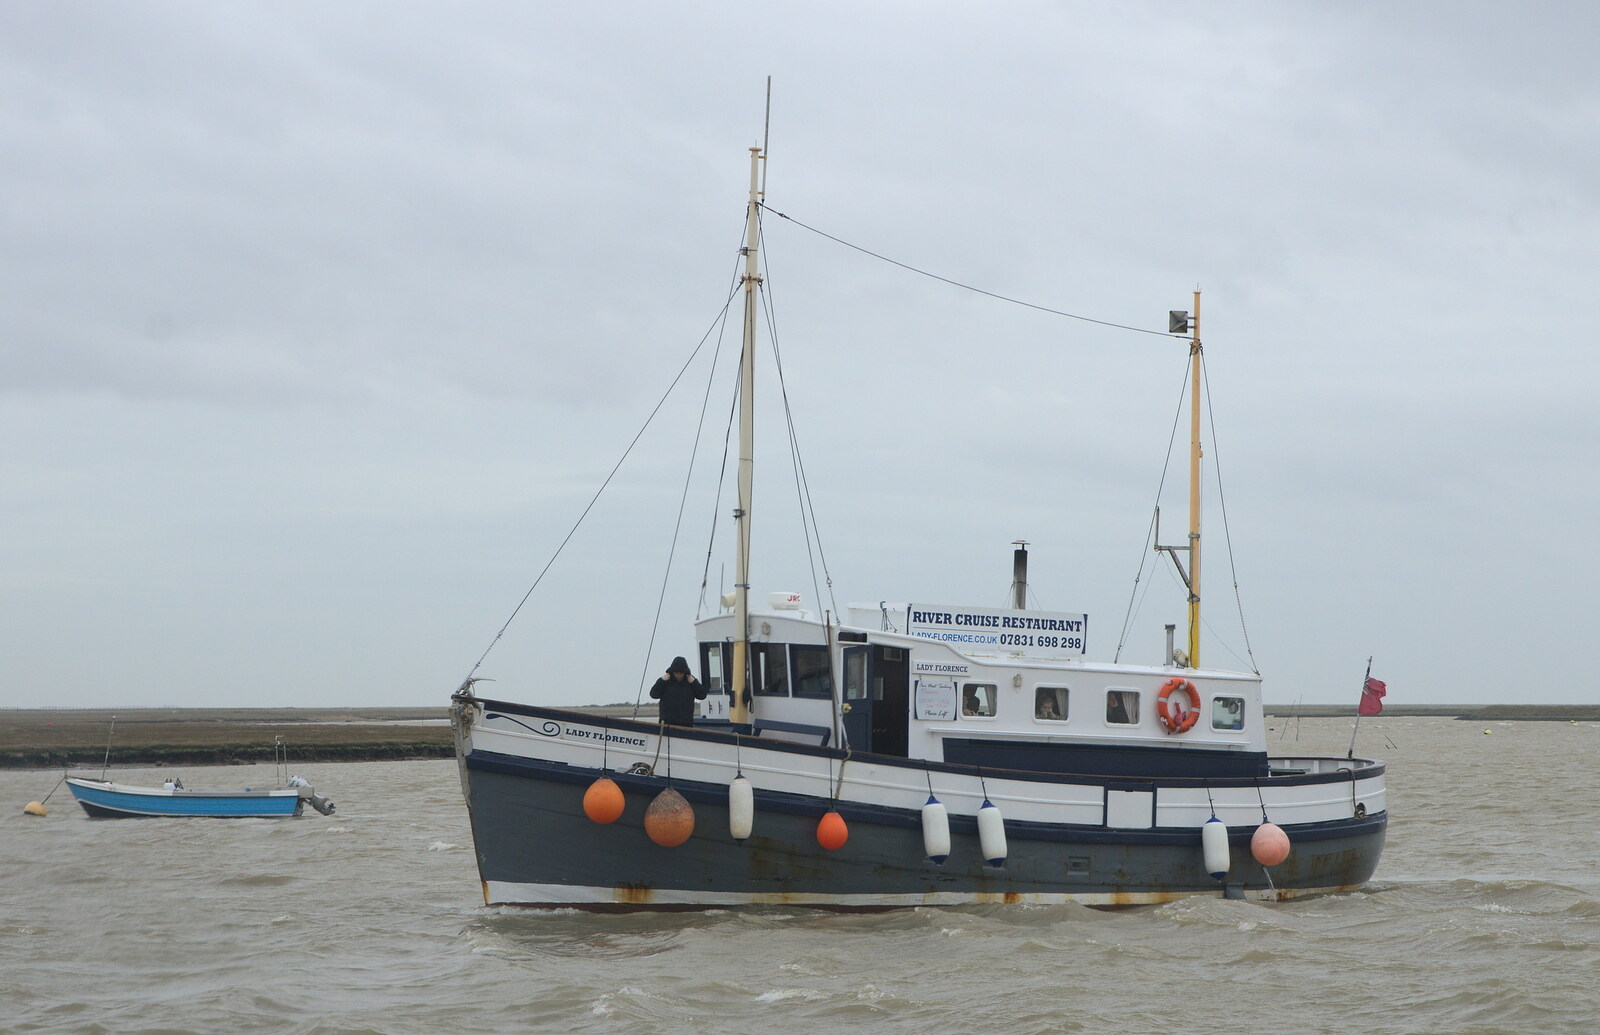 The MV Lady Florence trundles up the river from A Trip to Orford Castle, Orford, Suffolk - 2nd March 2014